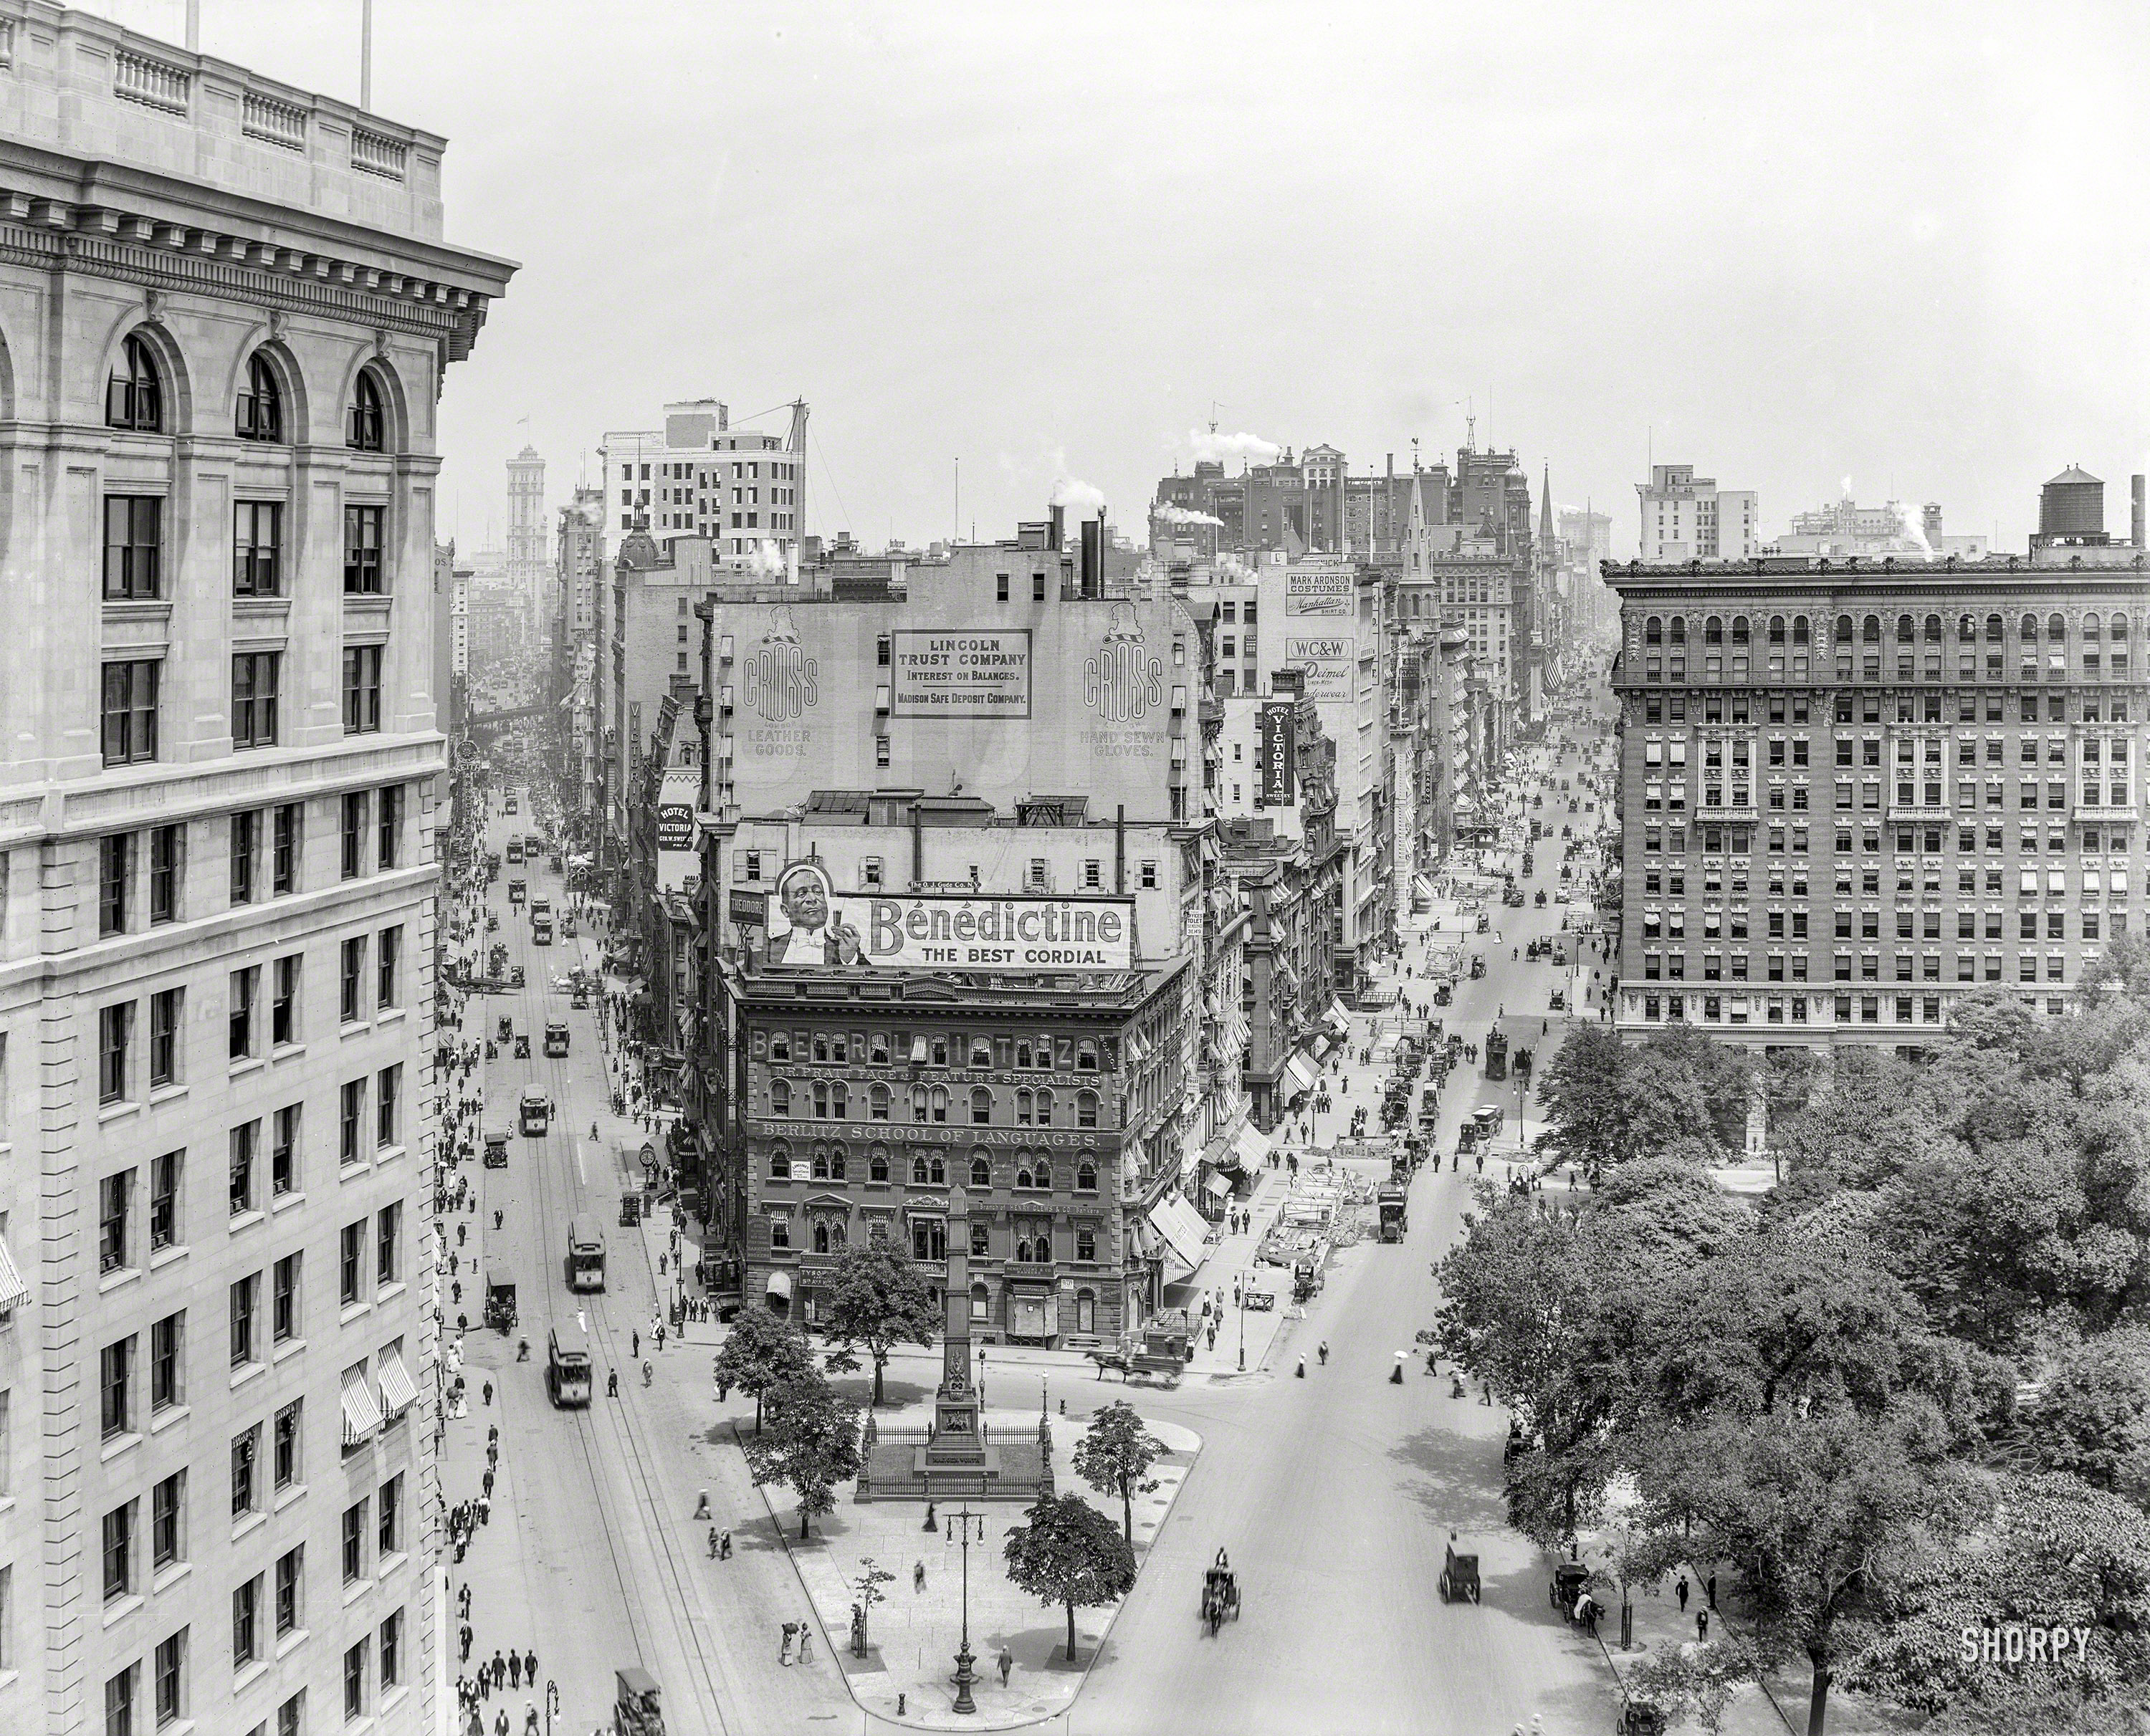 New York circa 1910. "Madison Square -- Worth Square monument at Broadway and Fifth Avenue." The Major General's obelisk, under the influence of a certain after-dinner liqueur. 8x10 inch dry plate glass negative. View full size.